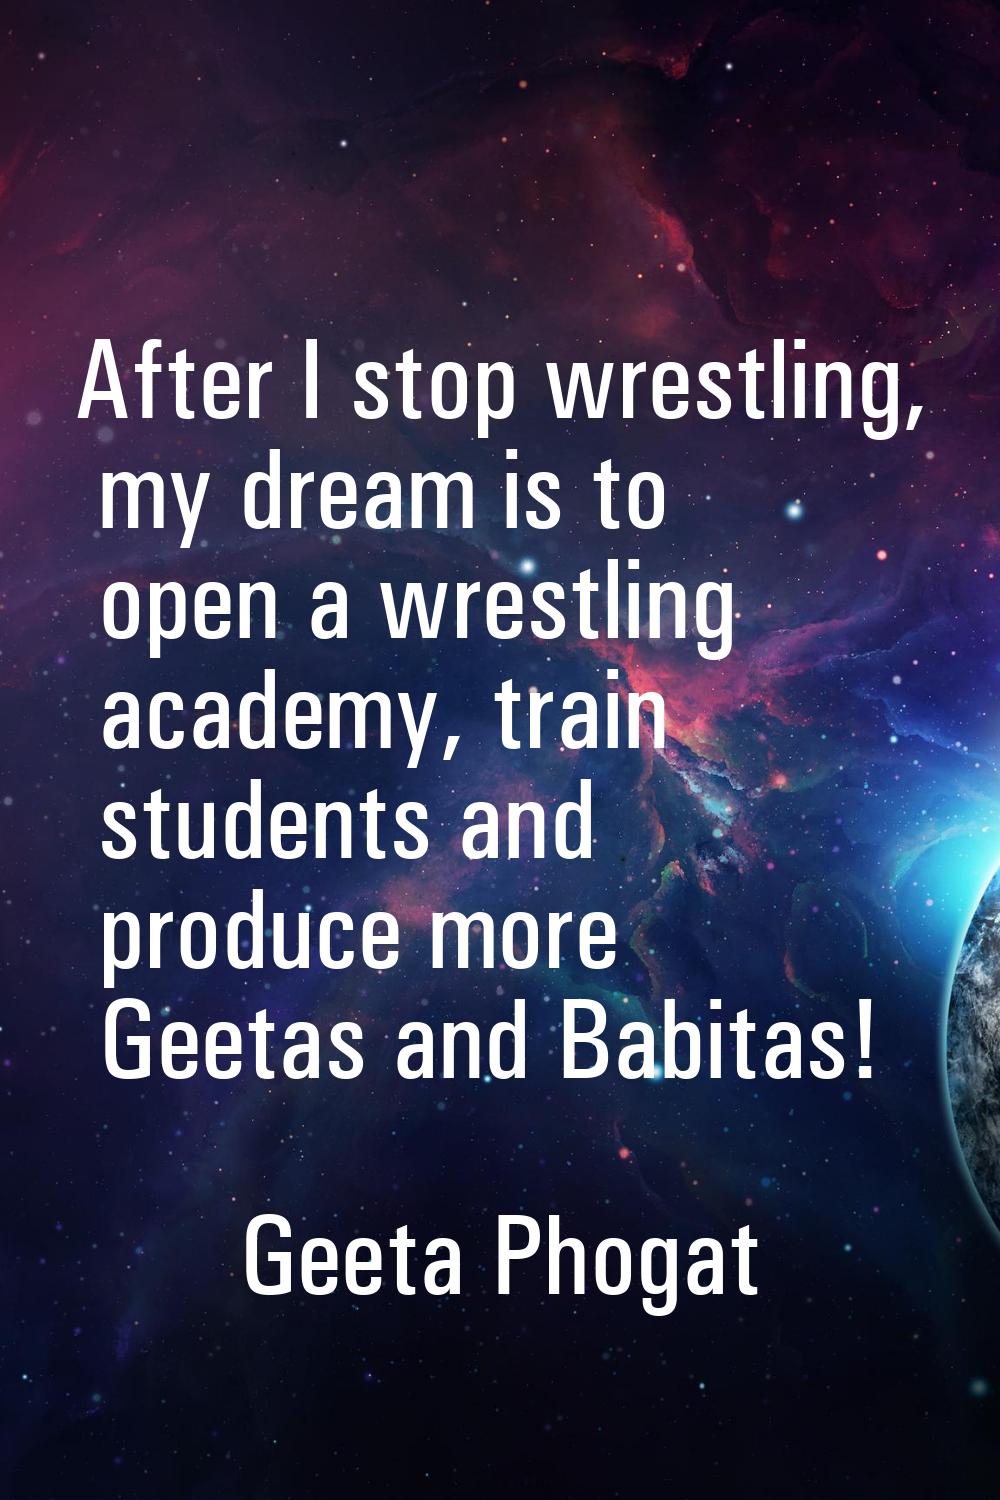 After I stop wrestling, my dream is to open a wrestling academy, train students and produce more Ge